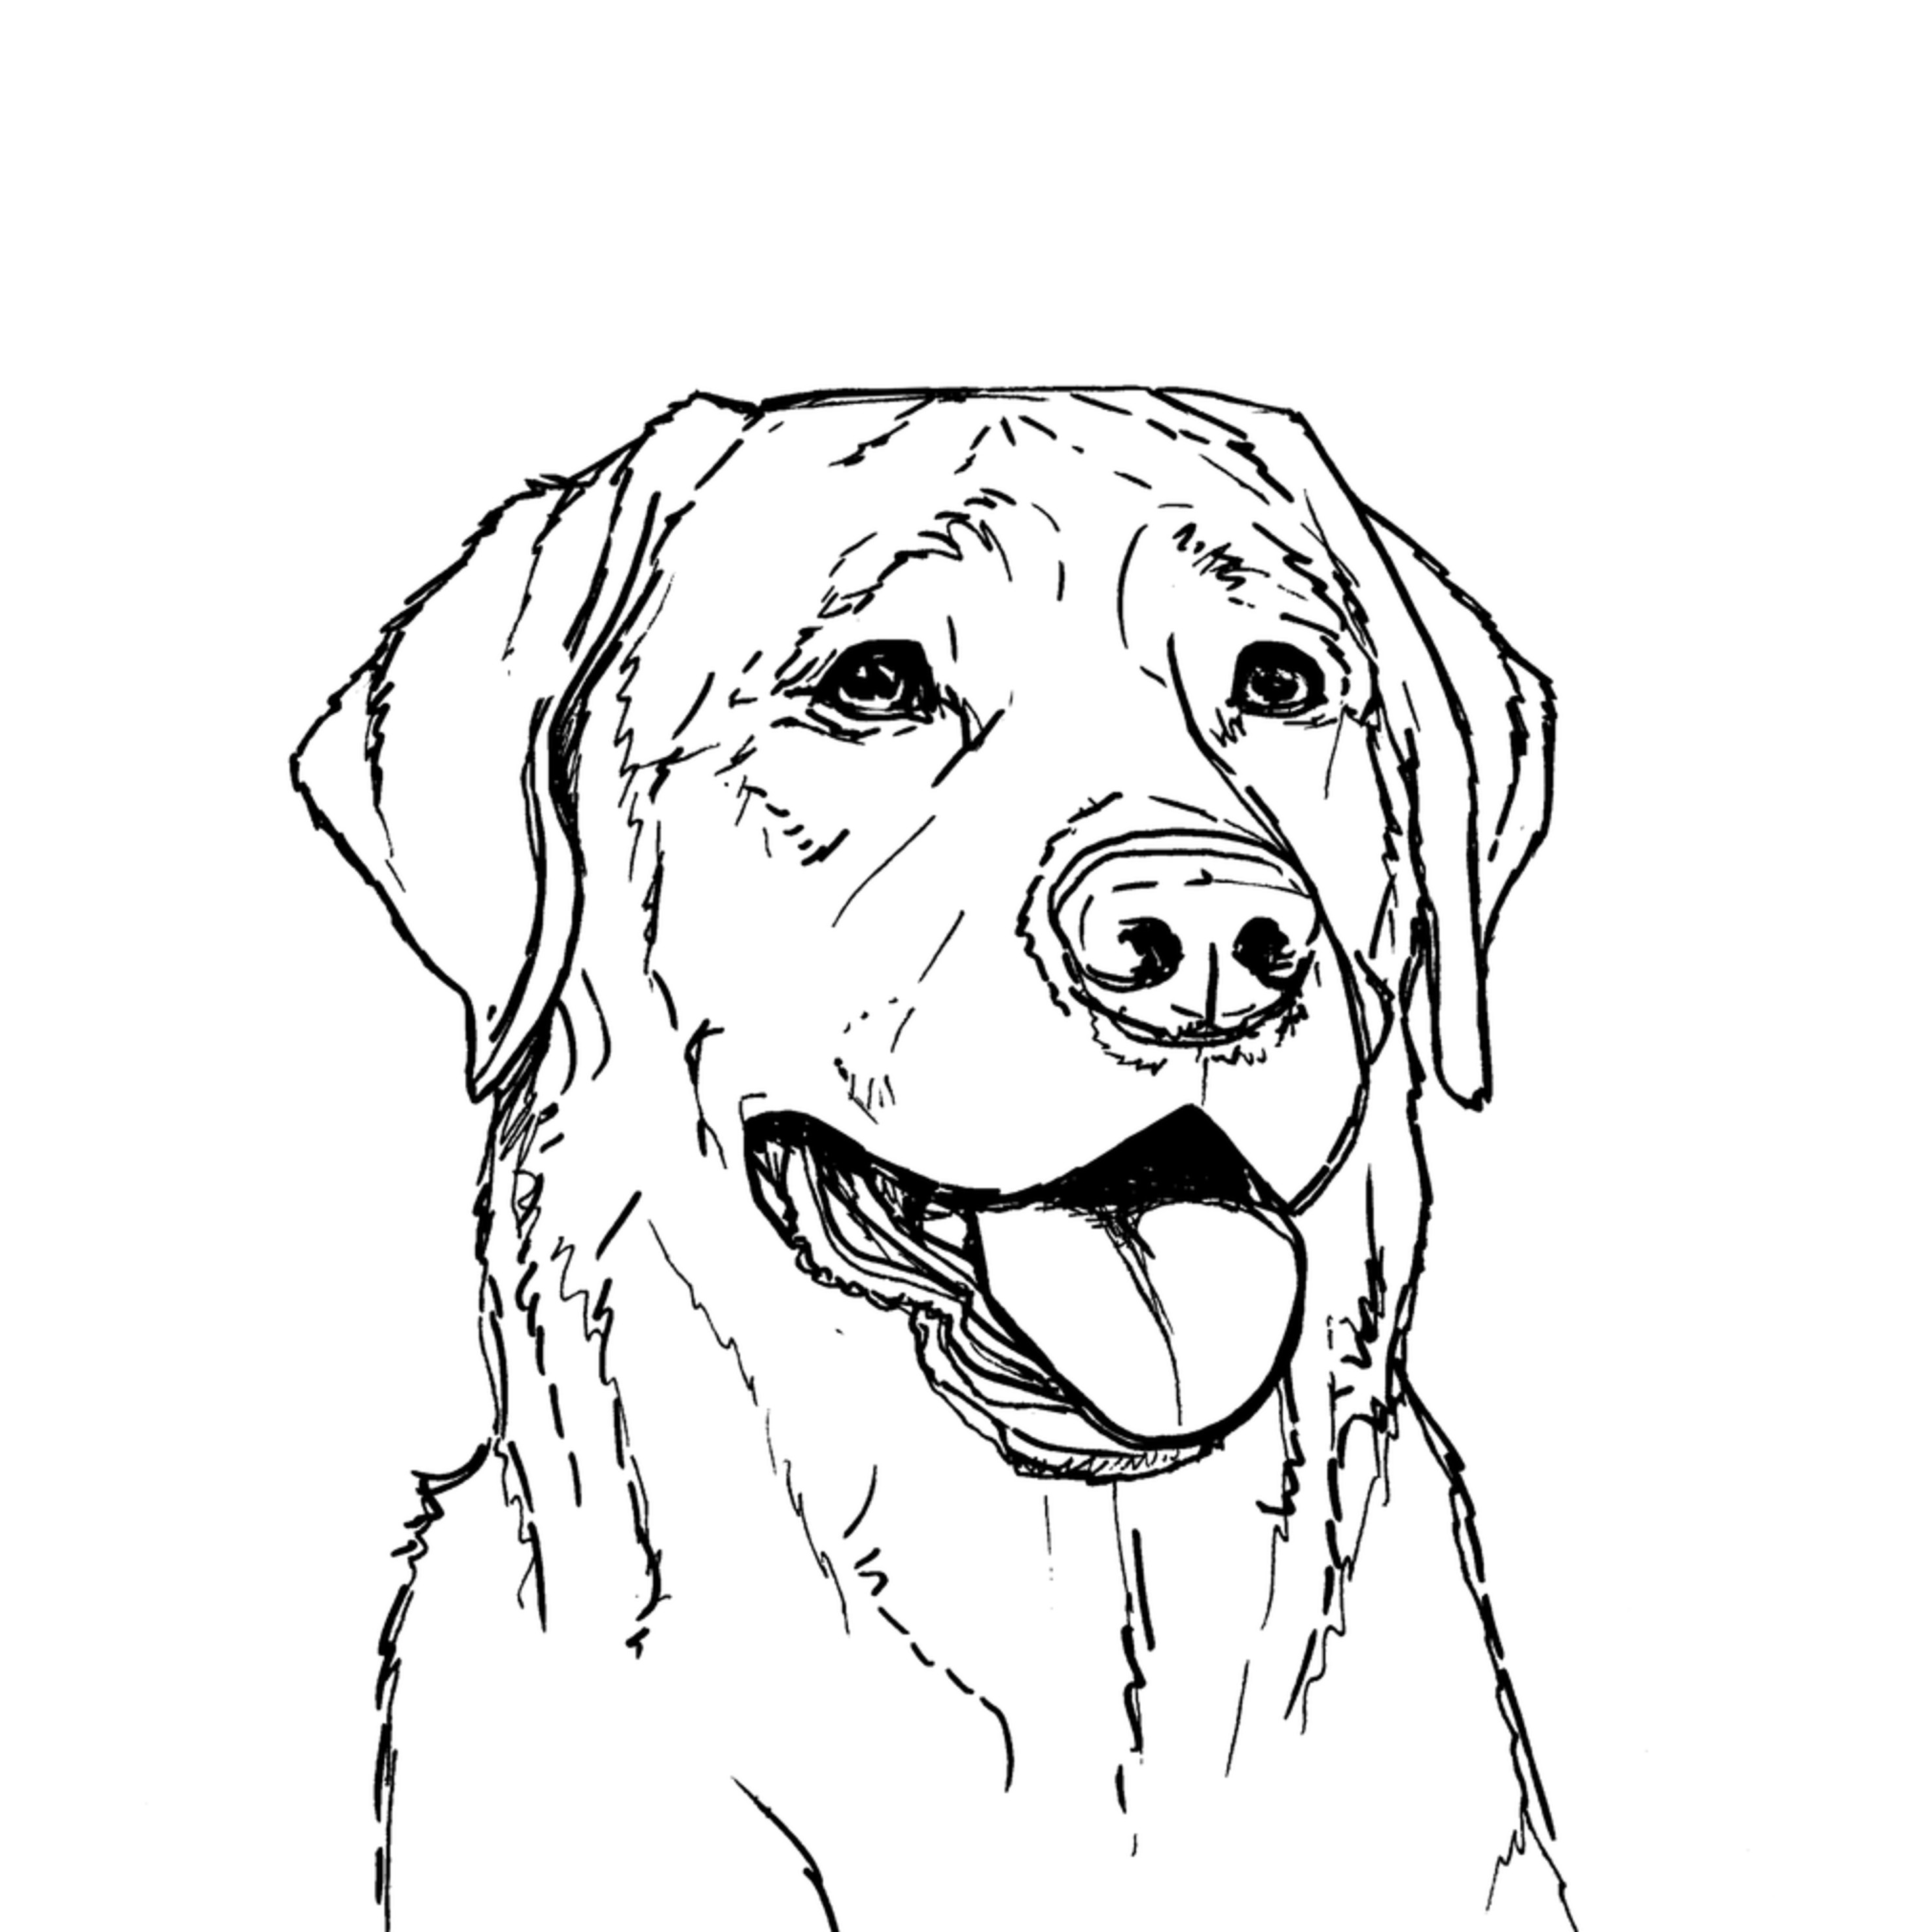 Black Lab Drawing / I almost passed it by as a photo in my inbox